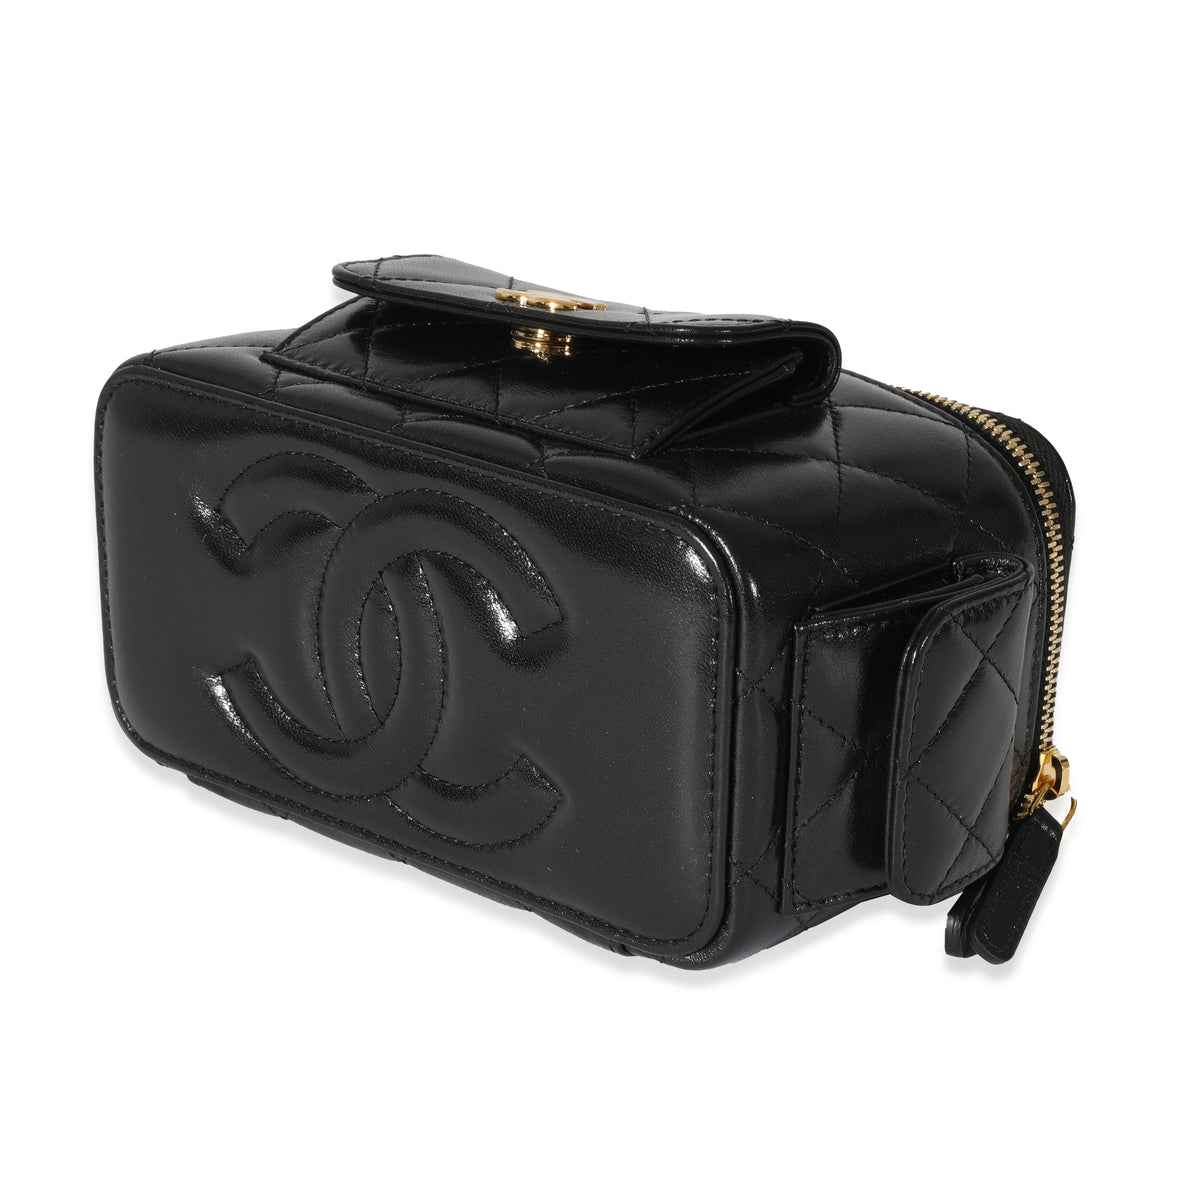 Chanel 22K Black Leather Vanity With Chain, myGemma, SG